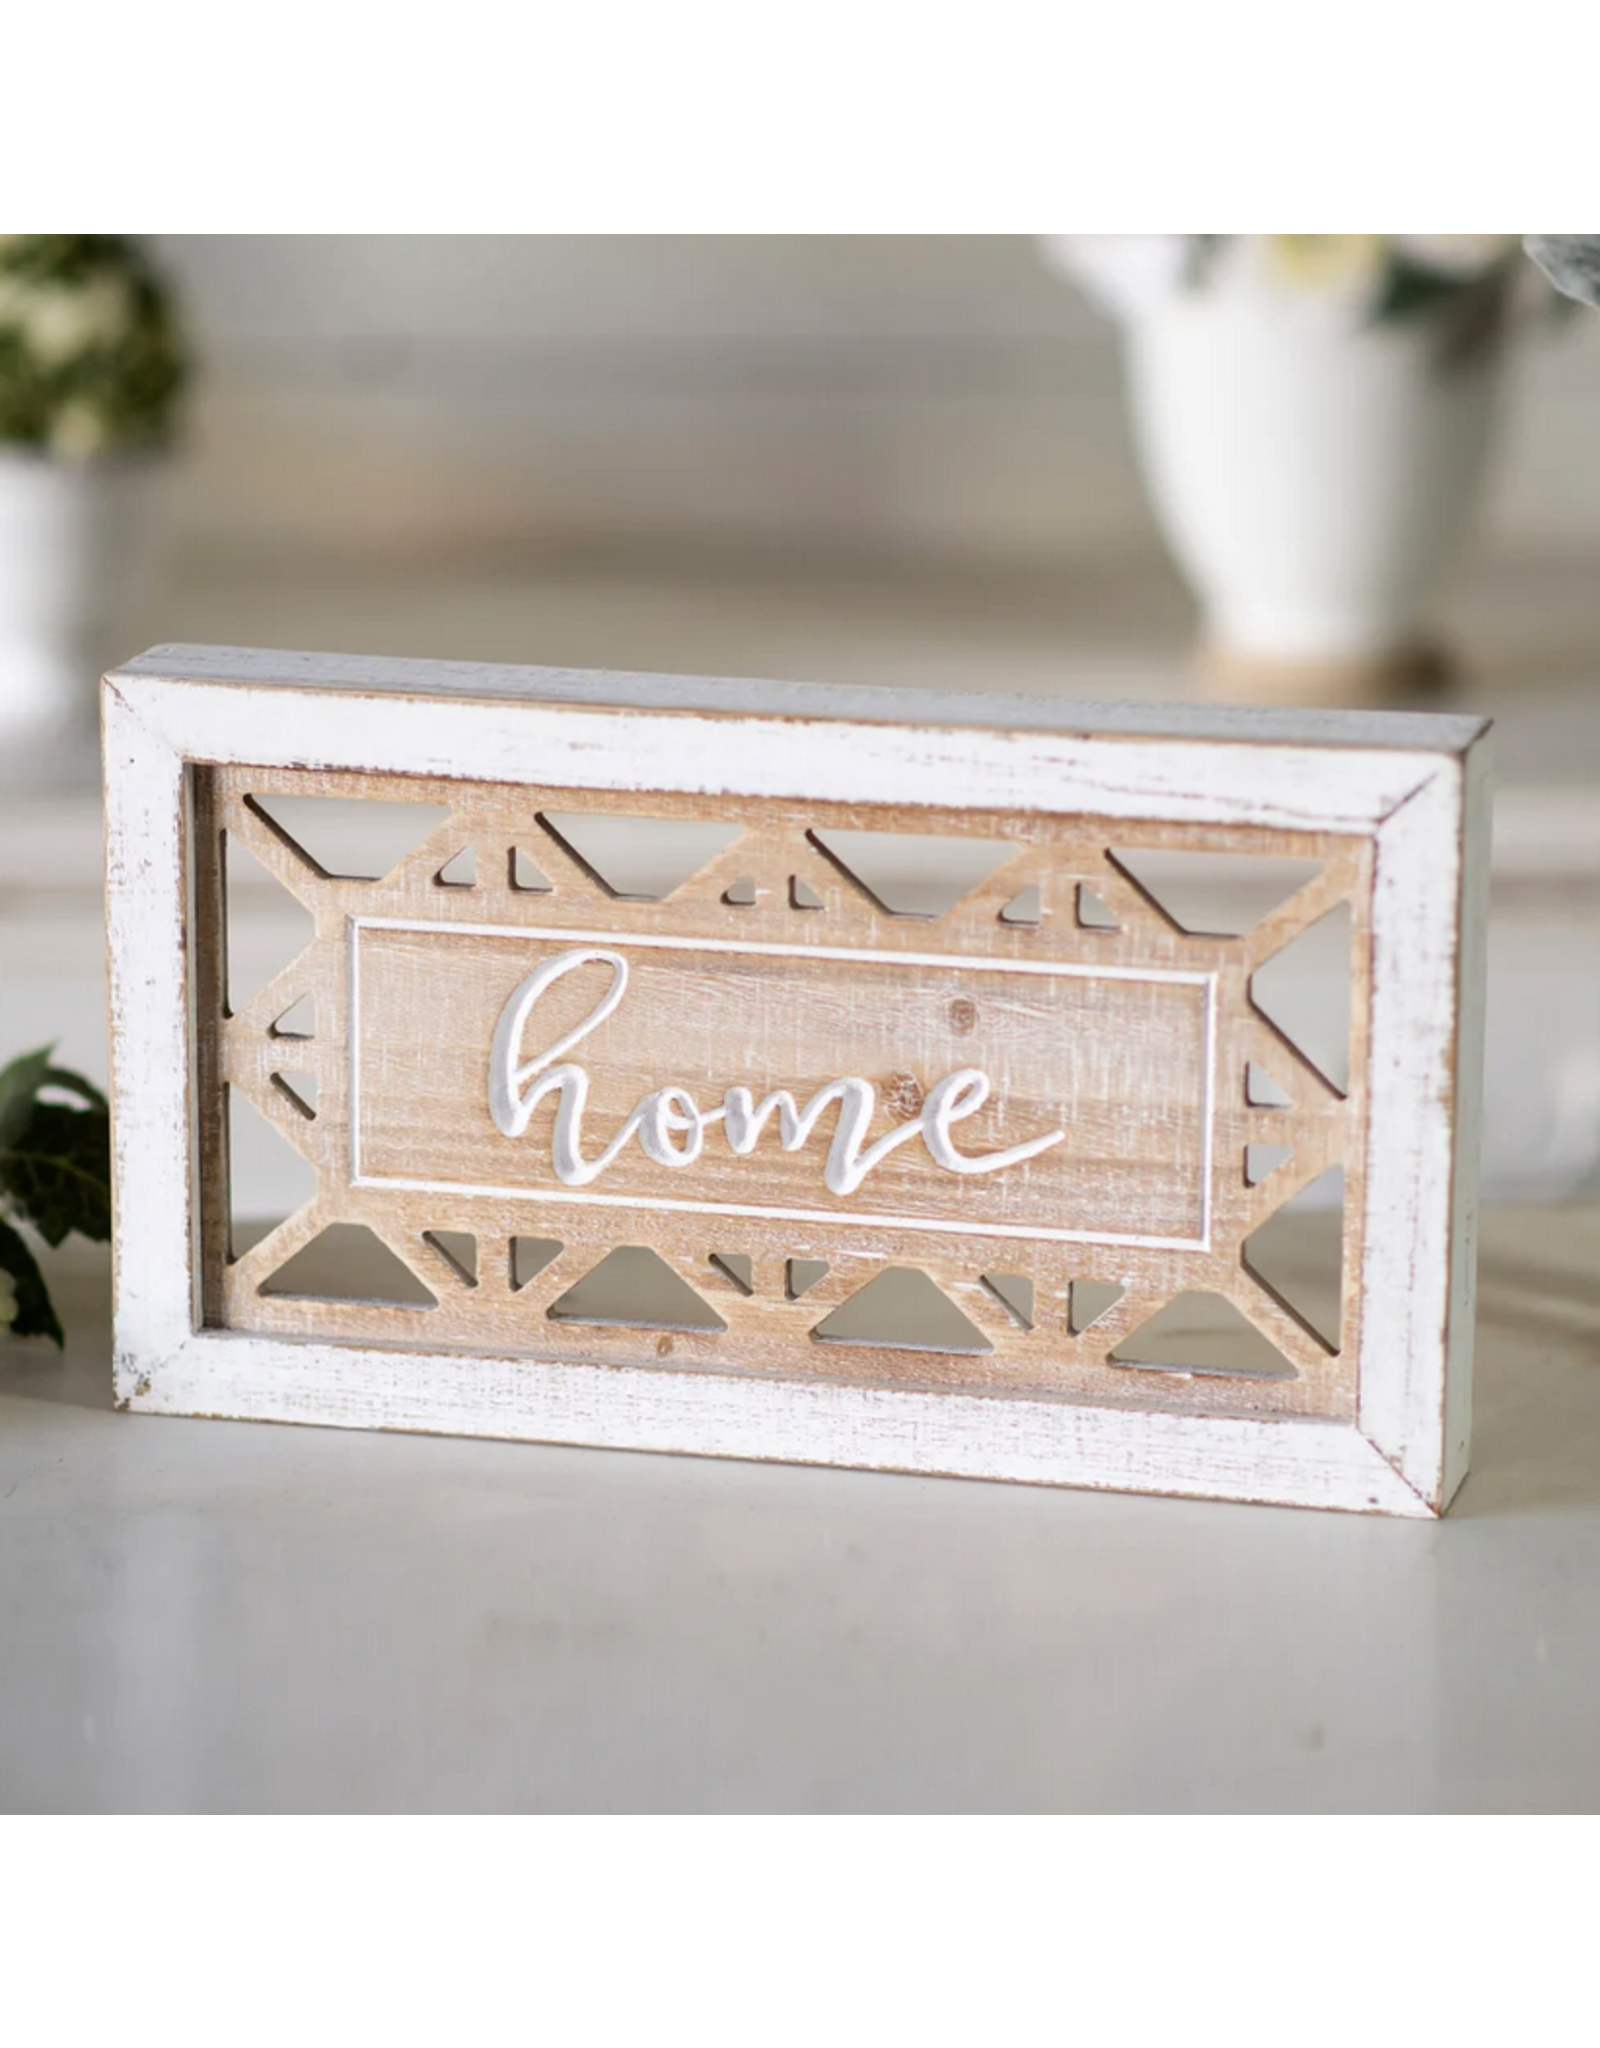 VIP Home & Garden Distressed "Home" White & Natural Sign